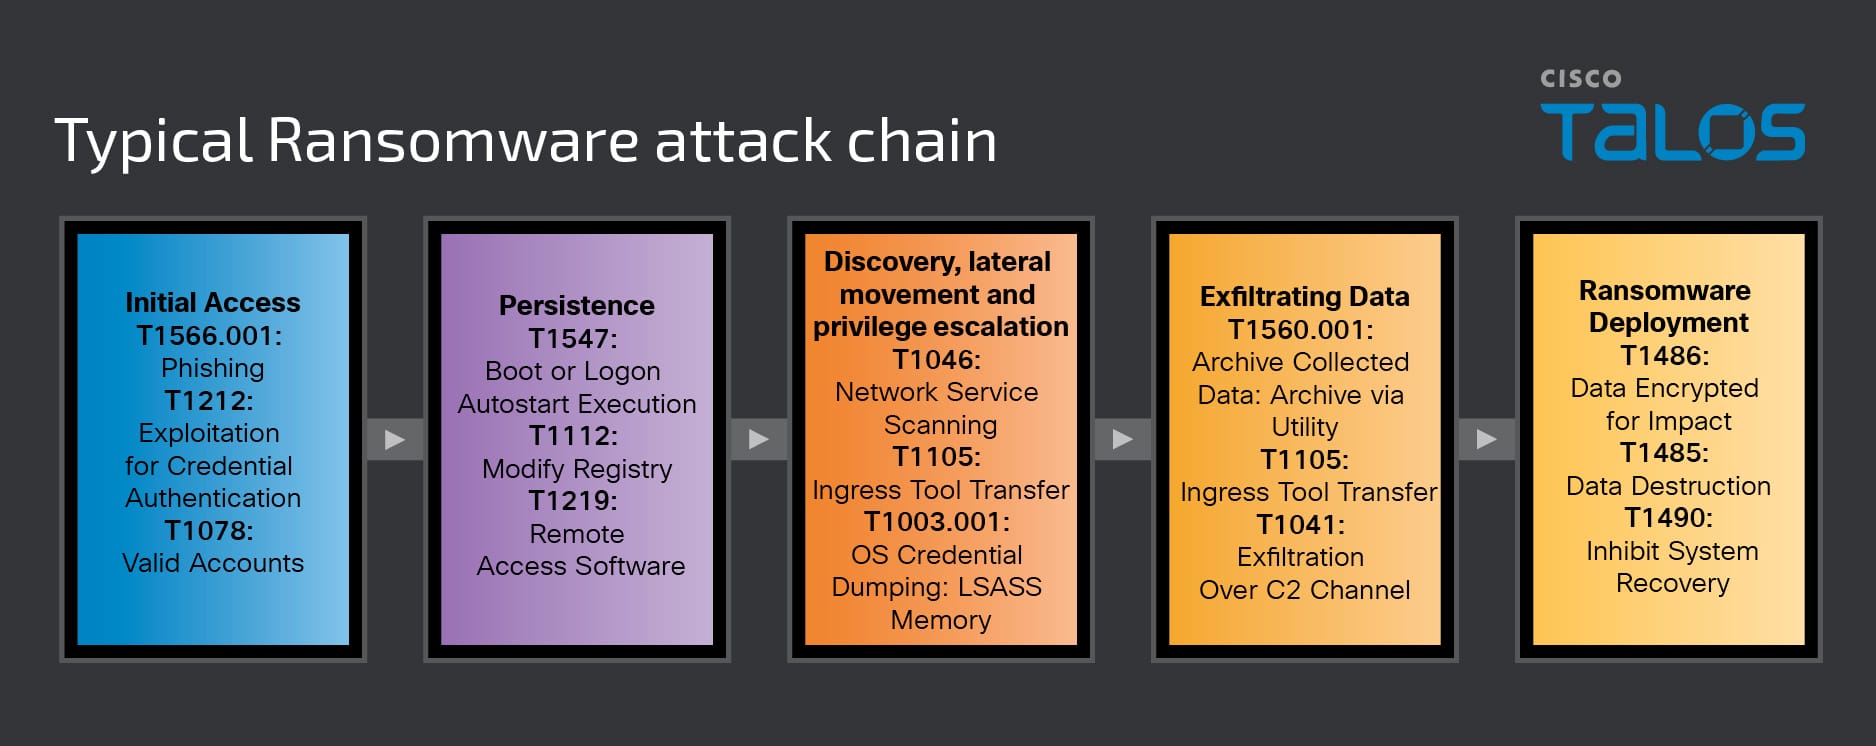 Inside the ransomware playbook: Analyzing attack chains and mapping common TTPs